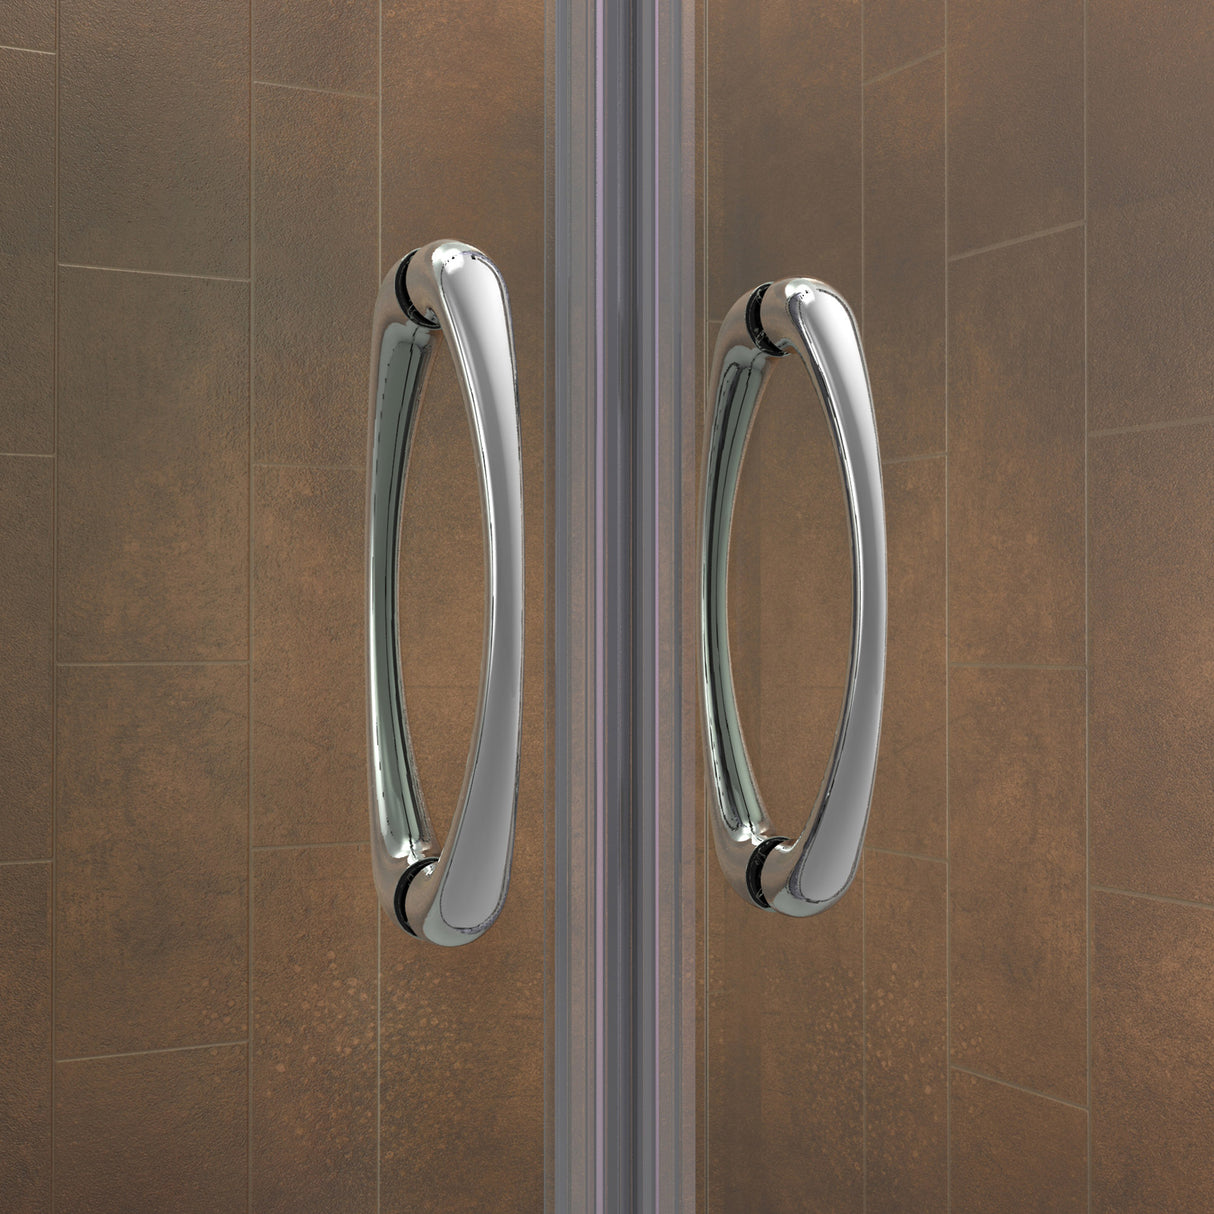 DreamLine Visions 32 in. D x 60 in. W x 74 3/4 in. H Sliding Shower Door in Chrome with Center Drain Black Shower Base